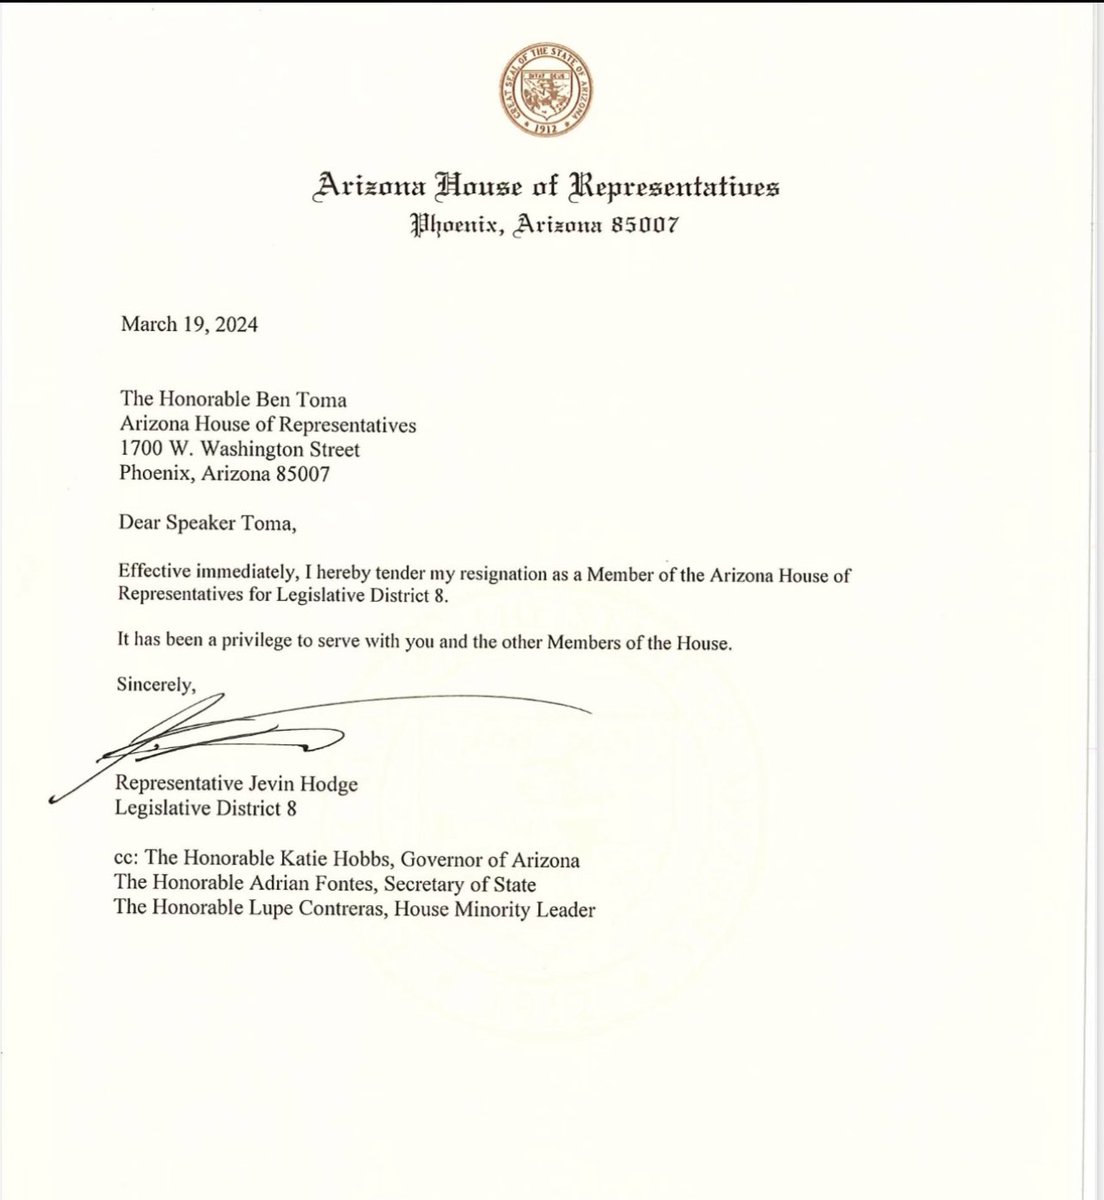 Here’s a copy of @JevinHodge’s resignation letter.